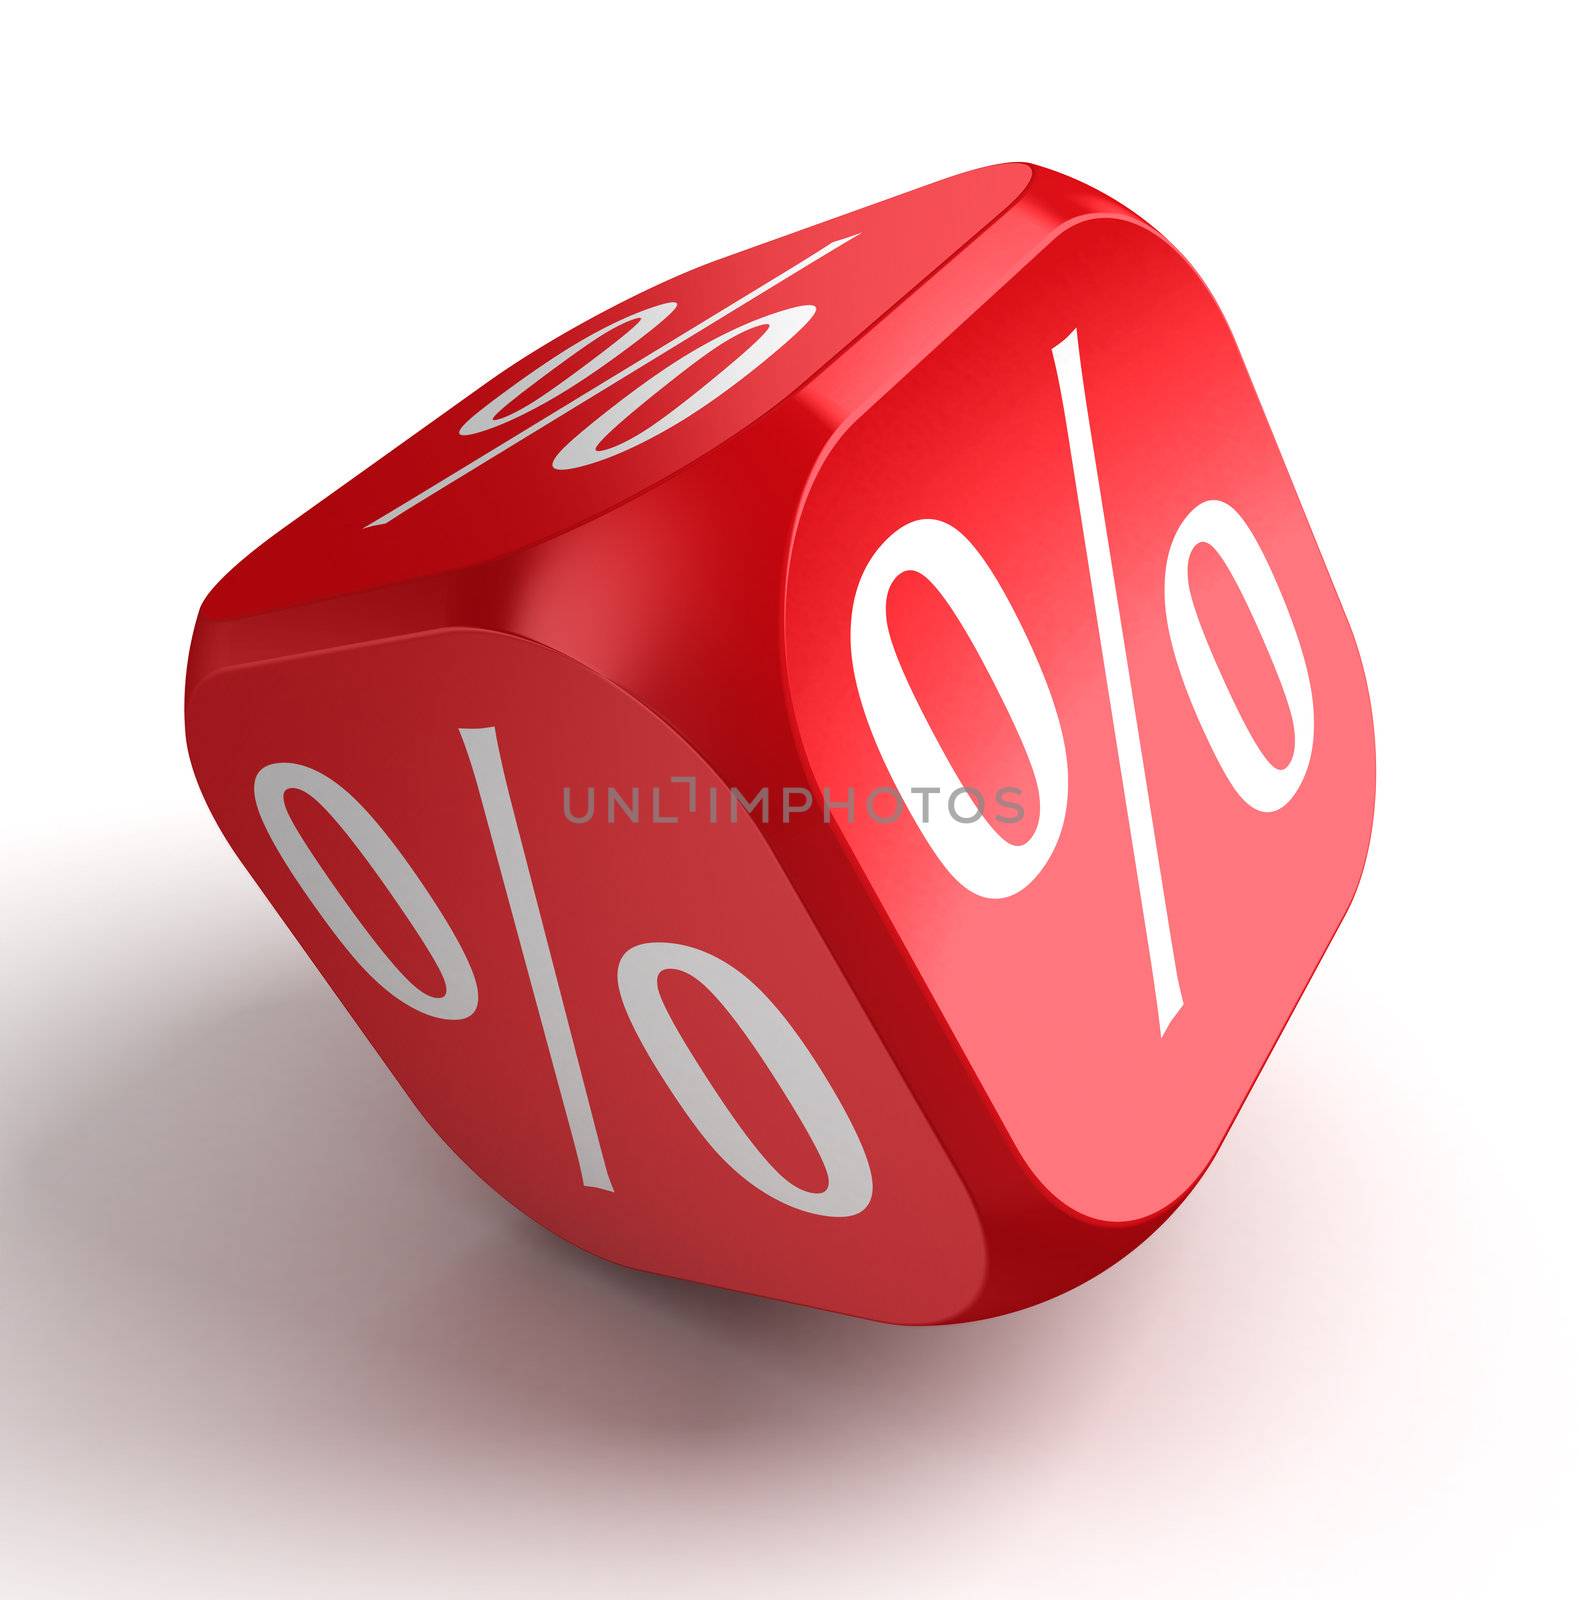 per cent conceptual red dice on white background. clipping path included